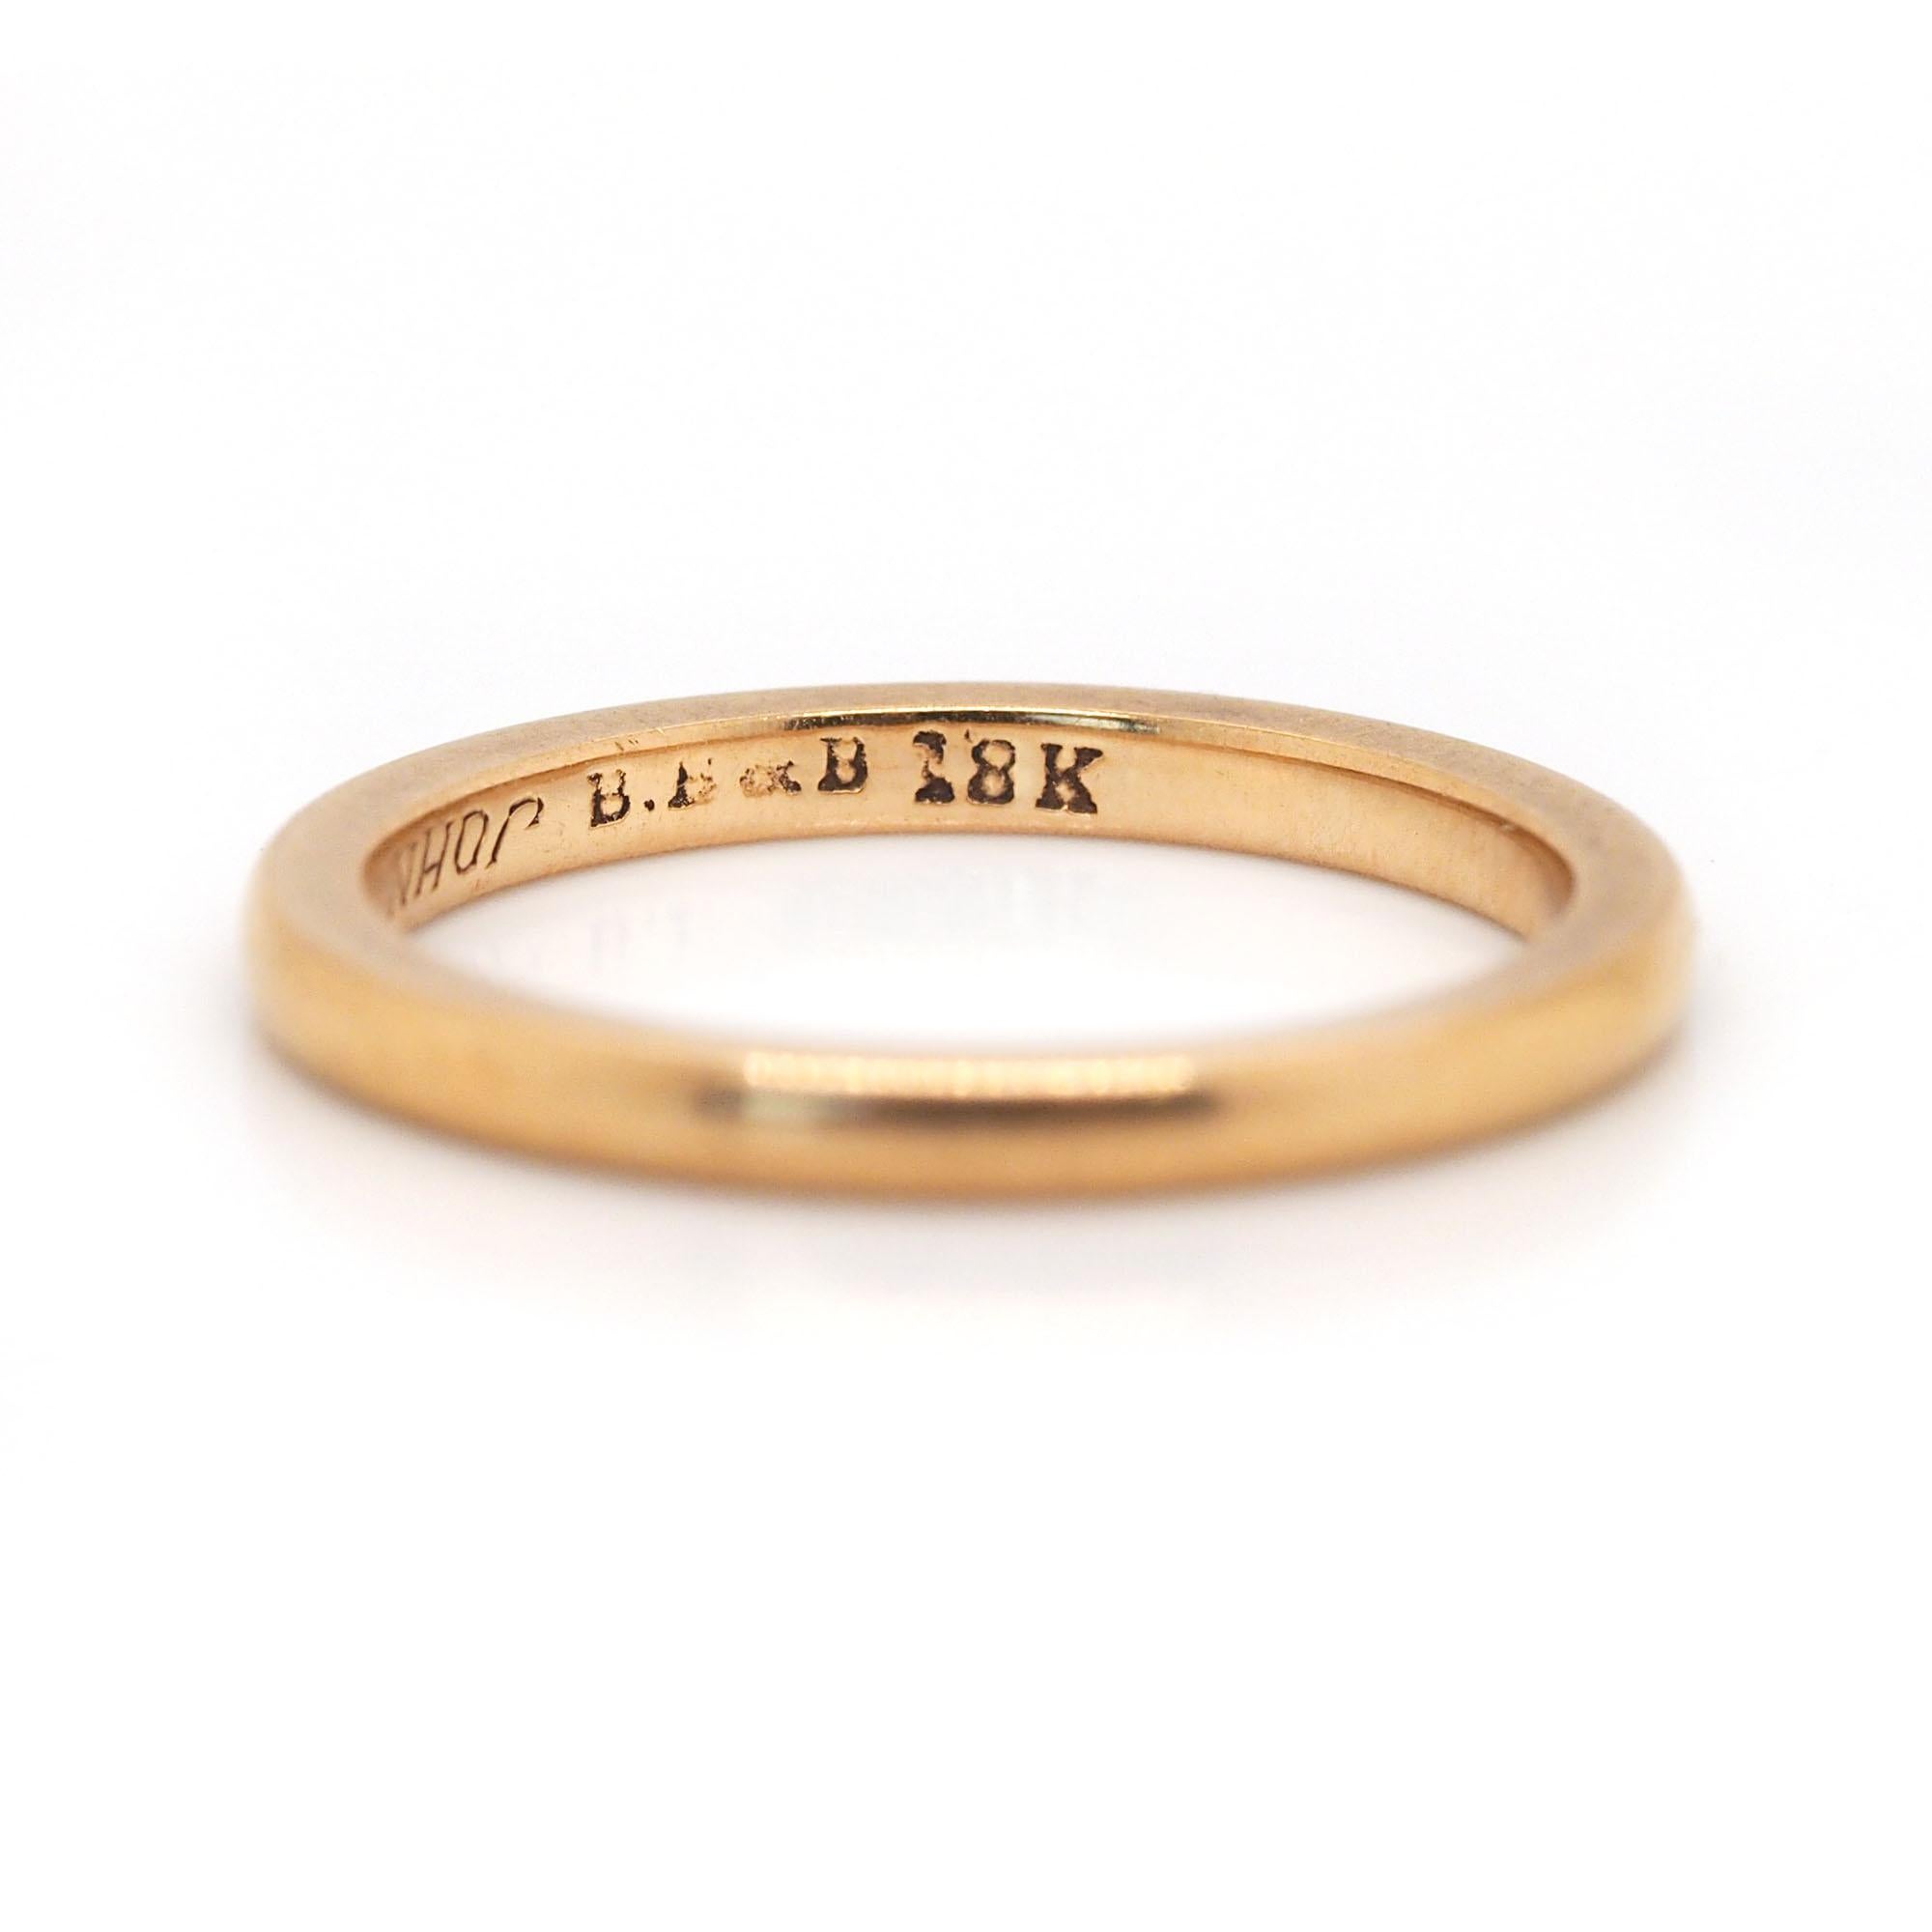 This is a Vintage Pre-Owned Bailey Banks and Biddle 18k Yellow Gold Thin Ladies Wedding Band from the 1920's.  Please review the following details on this beautiful piece.  The band measures 1.8mm in thickness and is a ring size 4 1/2.  It is